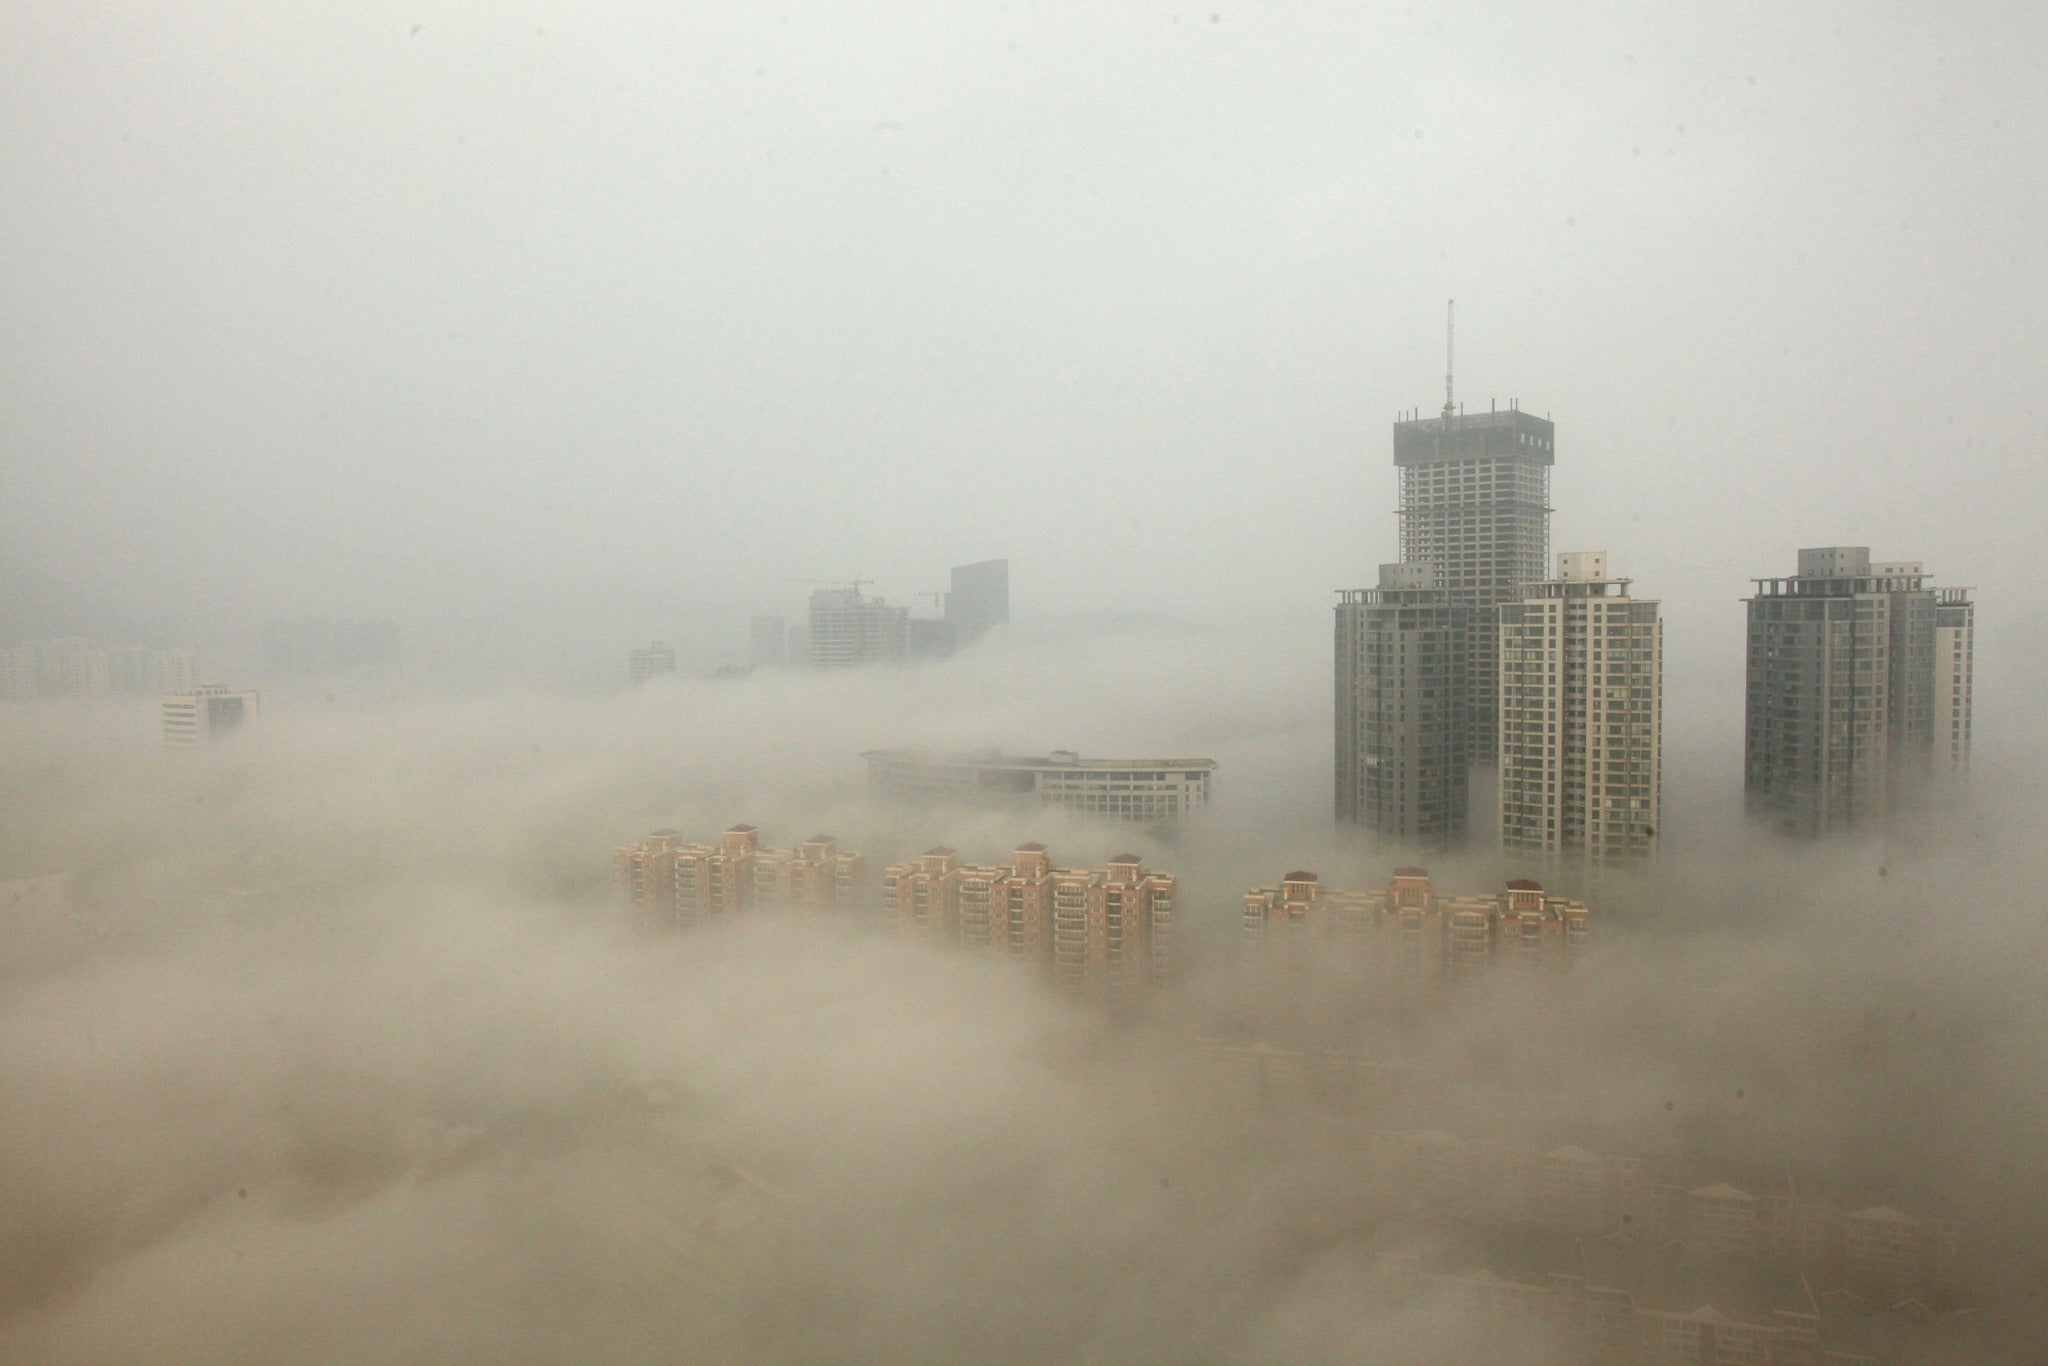 Chinese air pollution can create heavy smogs such as this one in Lianyungang